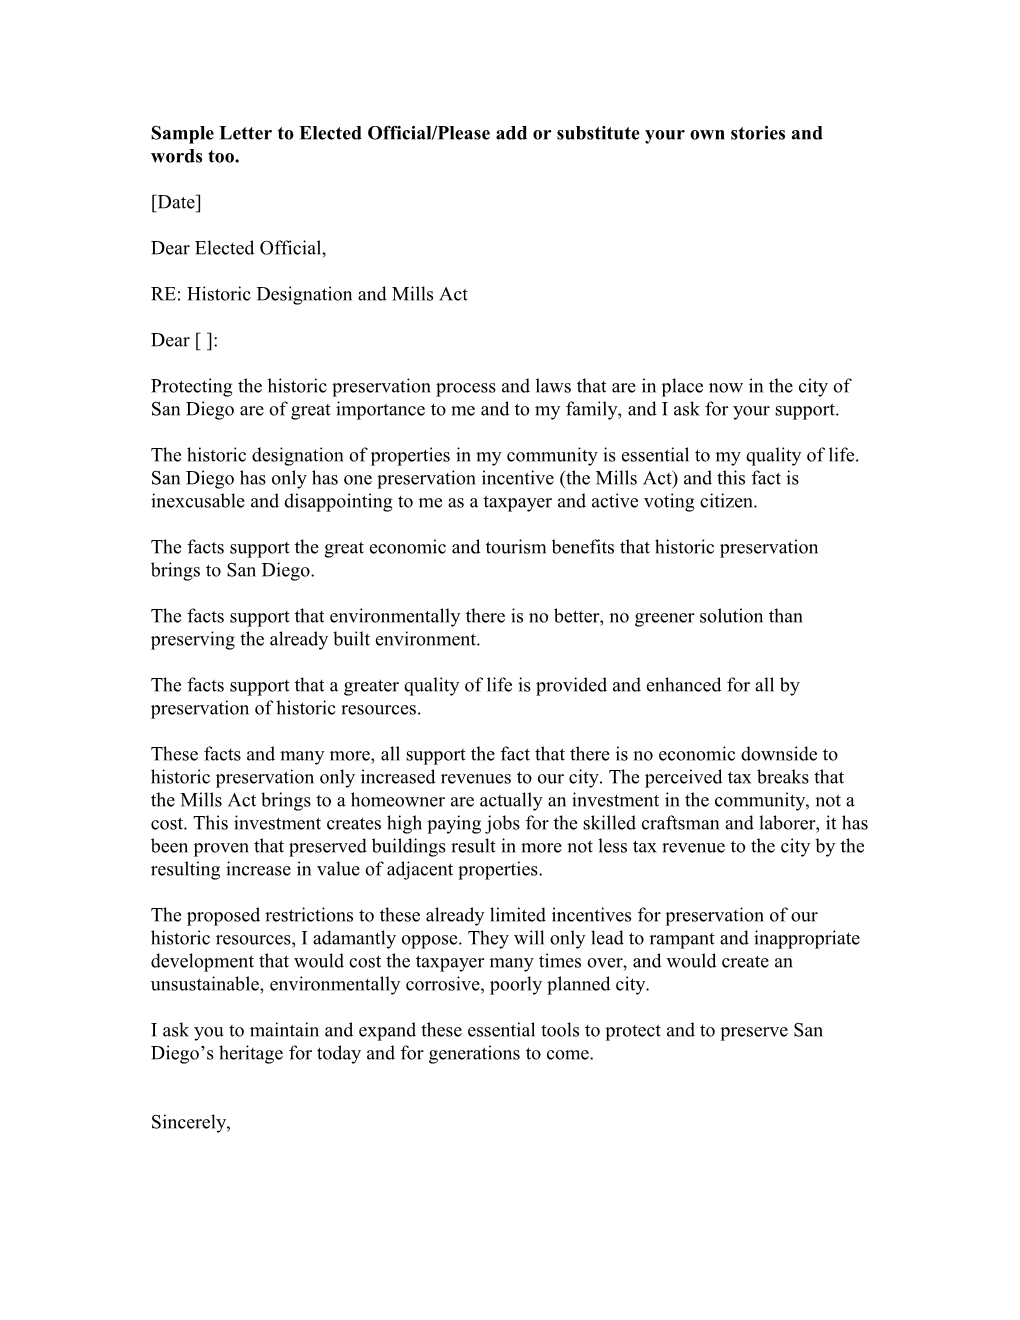 Sample Letter to Elected Official